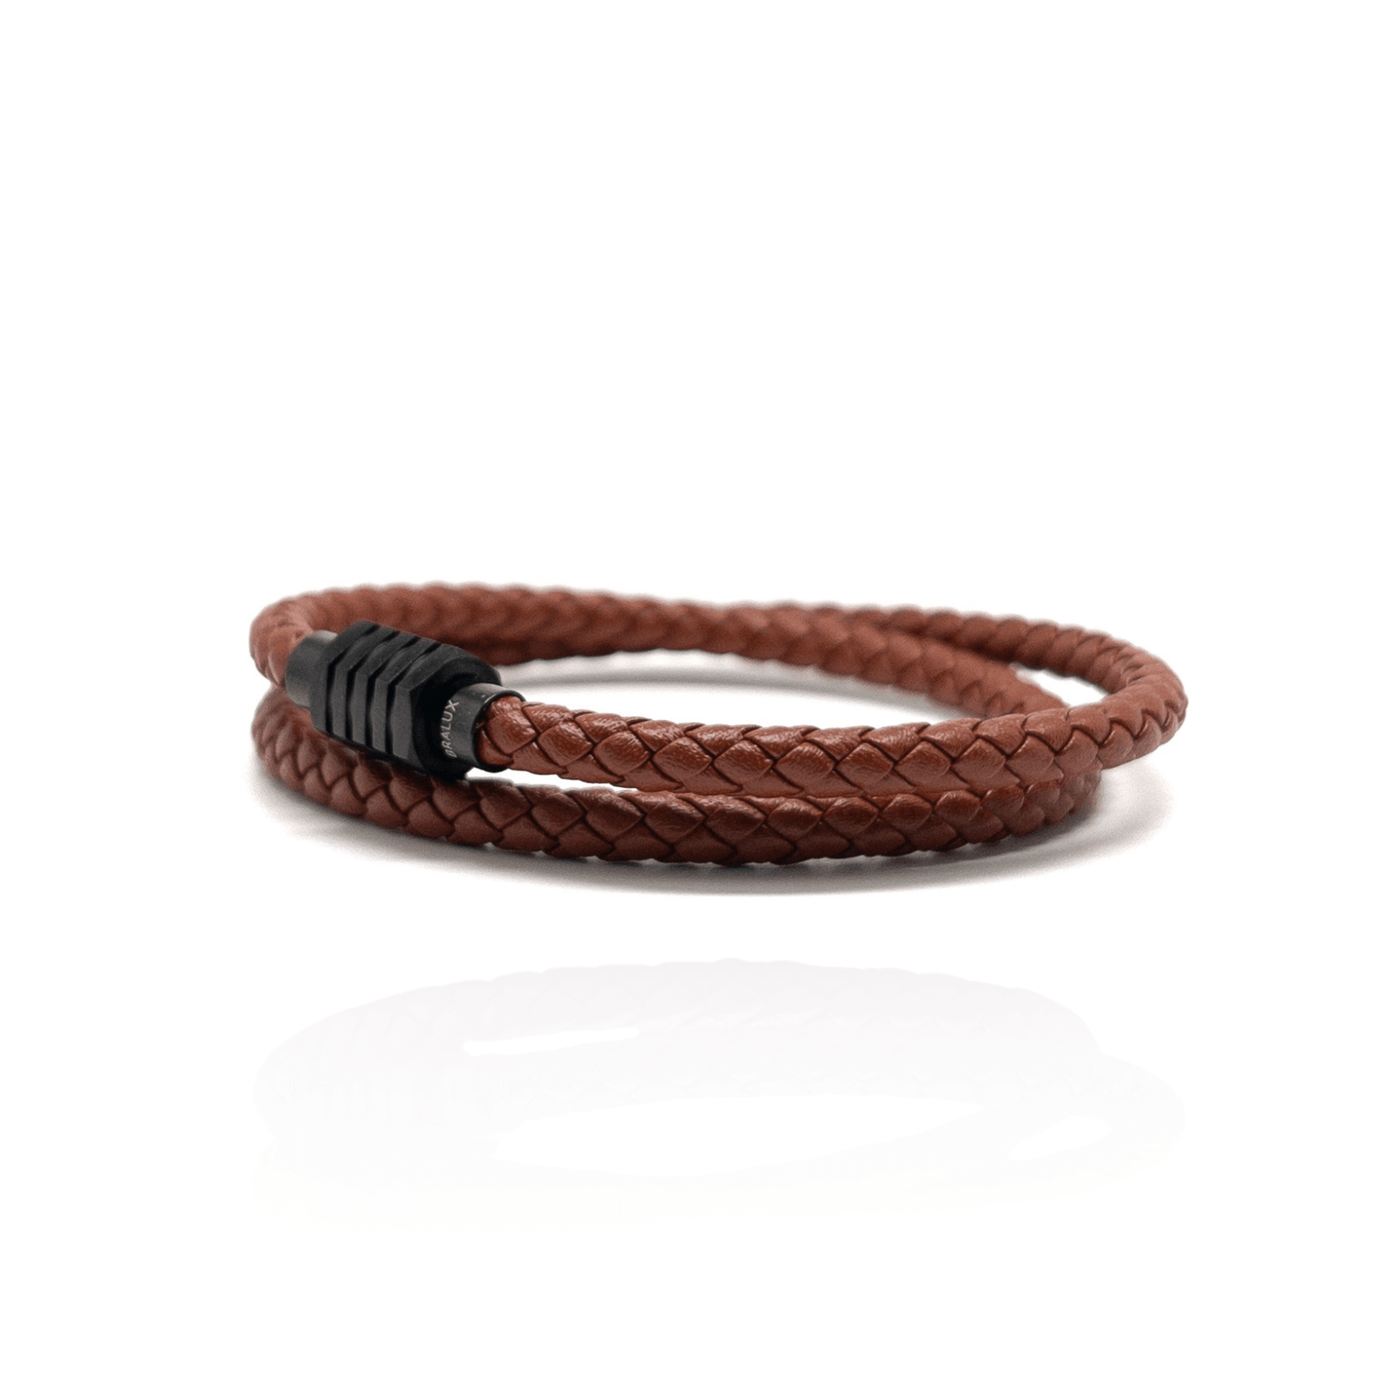 The Brown duo and Black Plated Buckle Leather bracelet